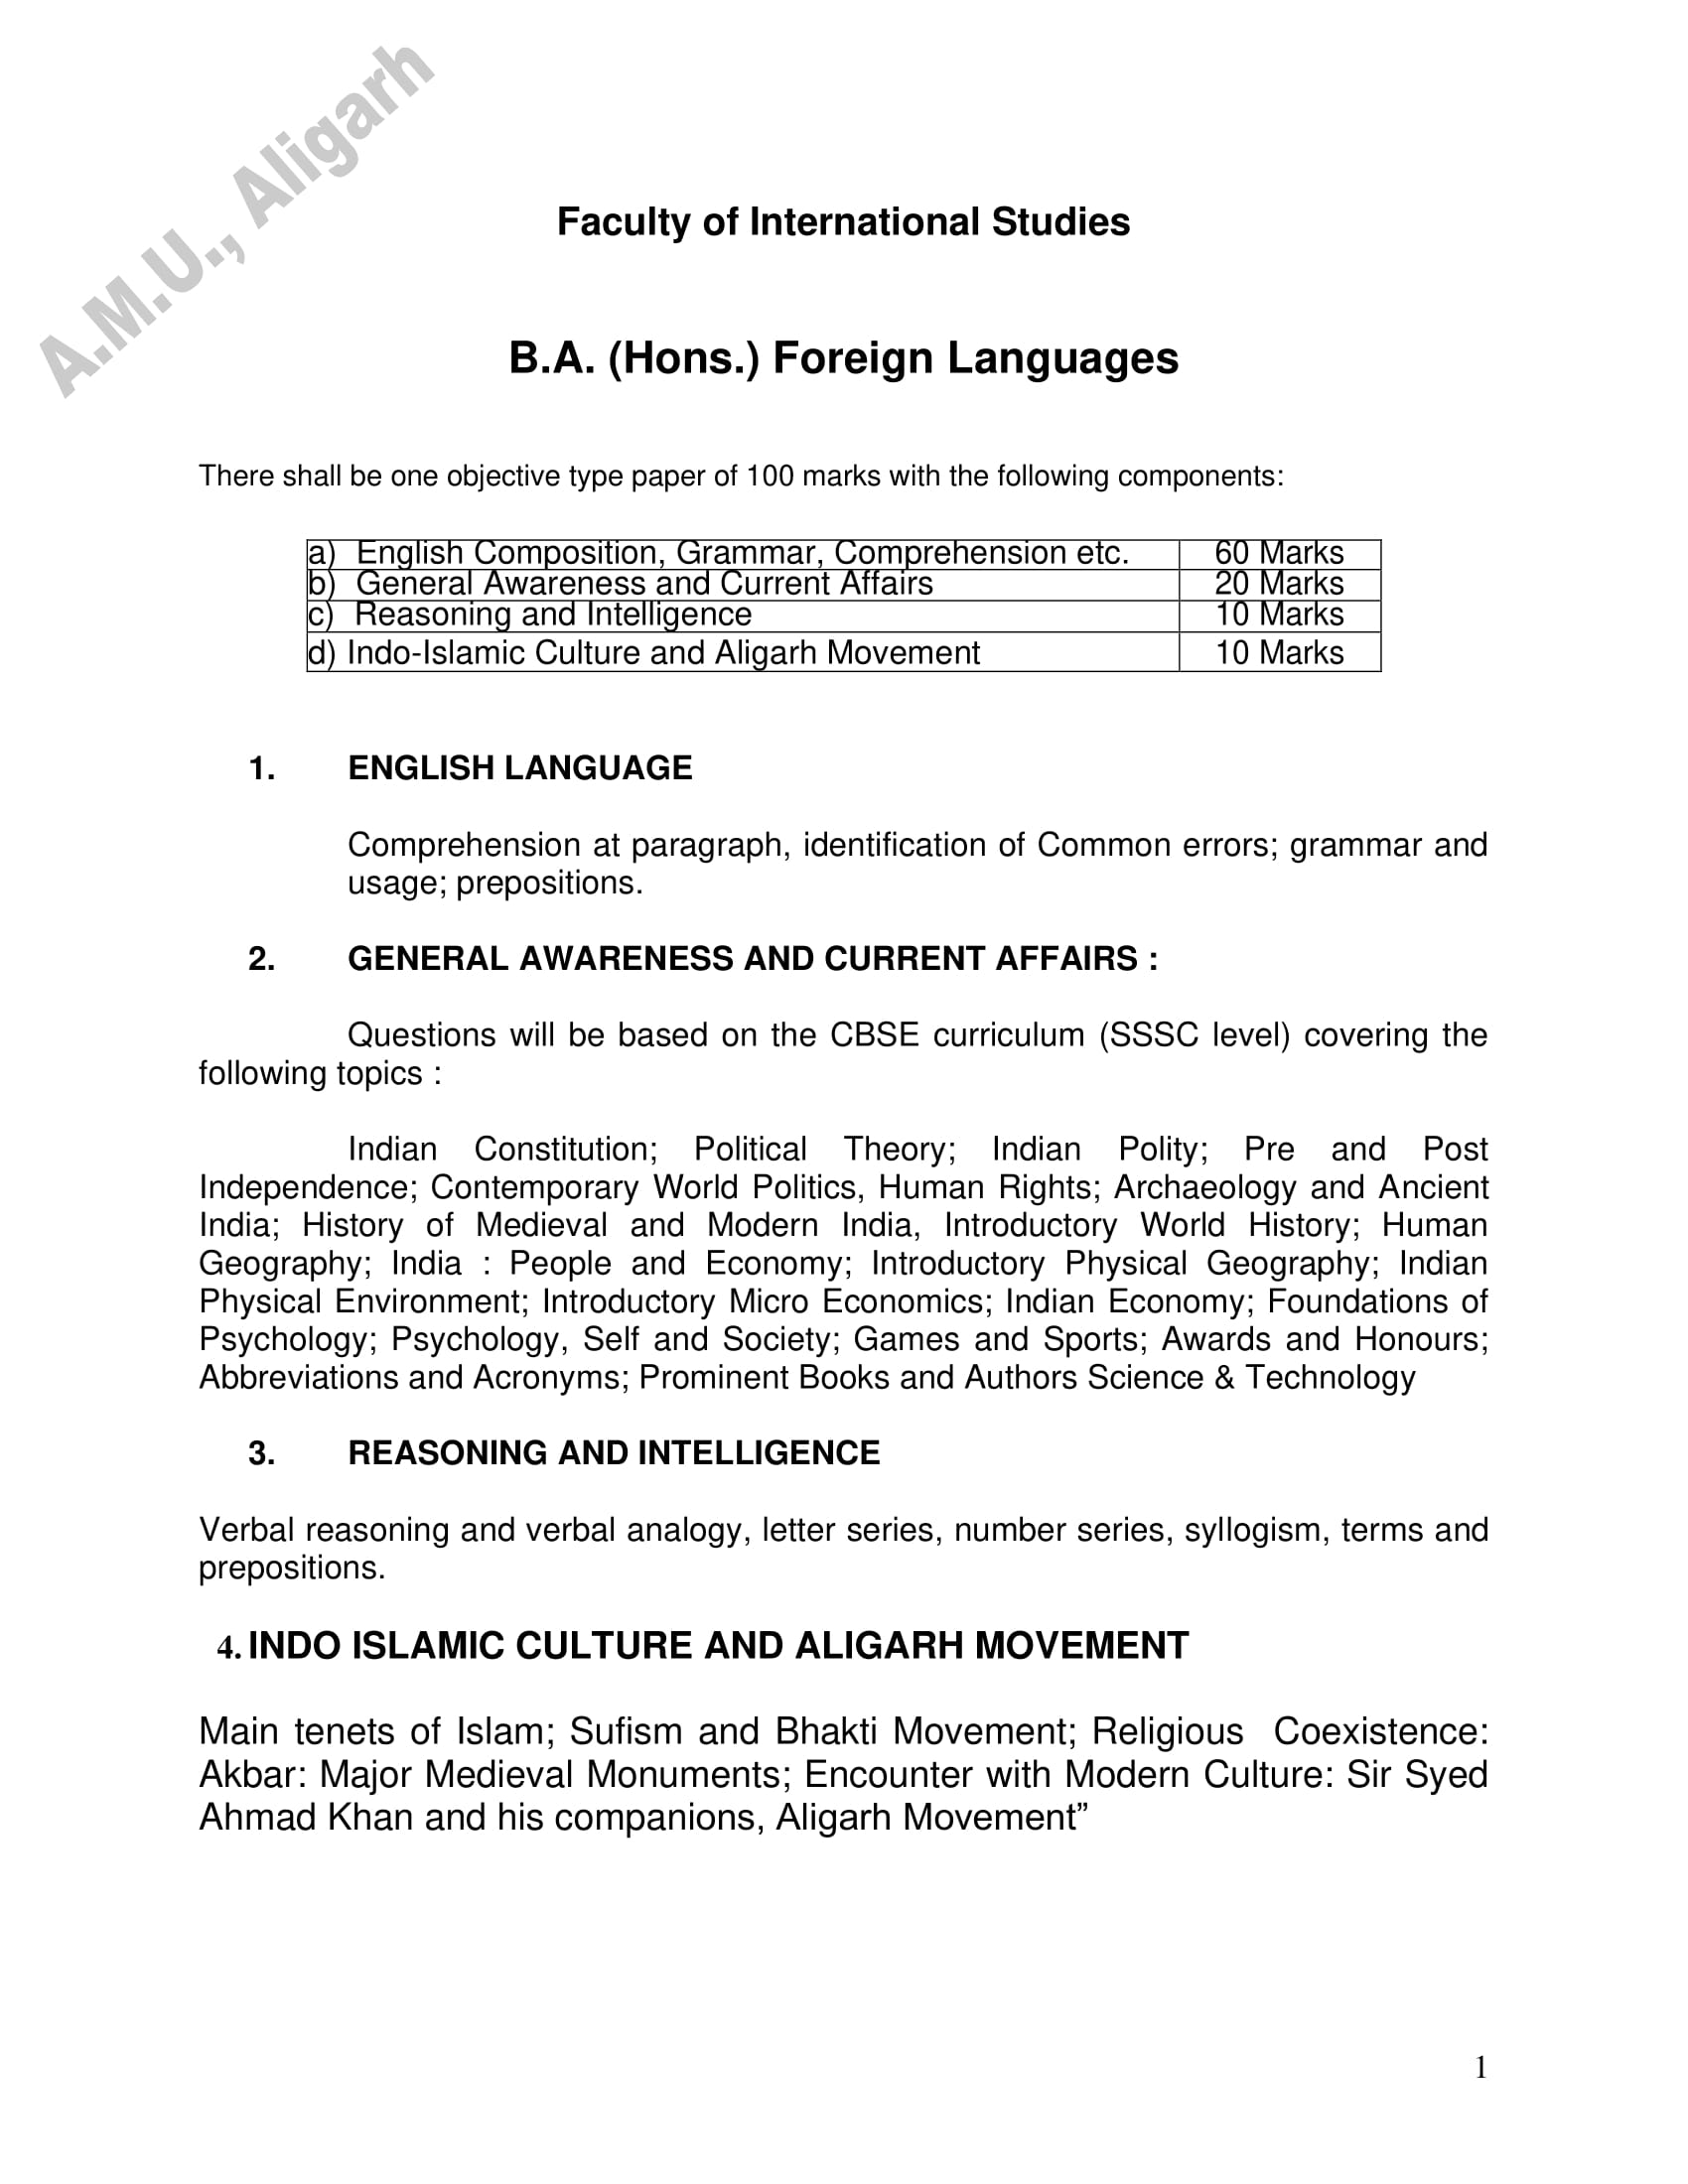 AMU Entrance Exam Syllabus for BA (Hons.) in Foreign Languages - Page 1